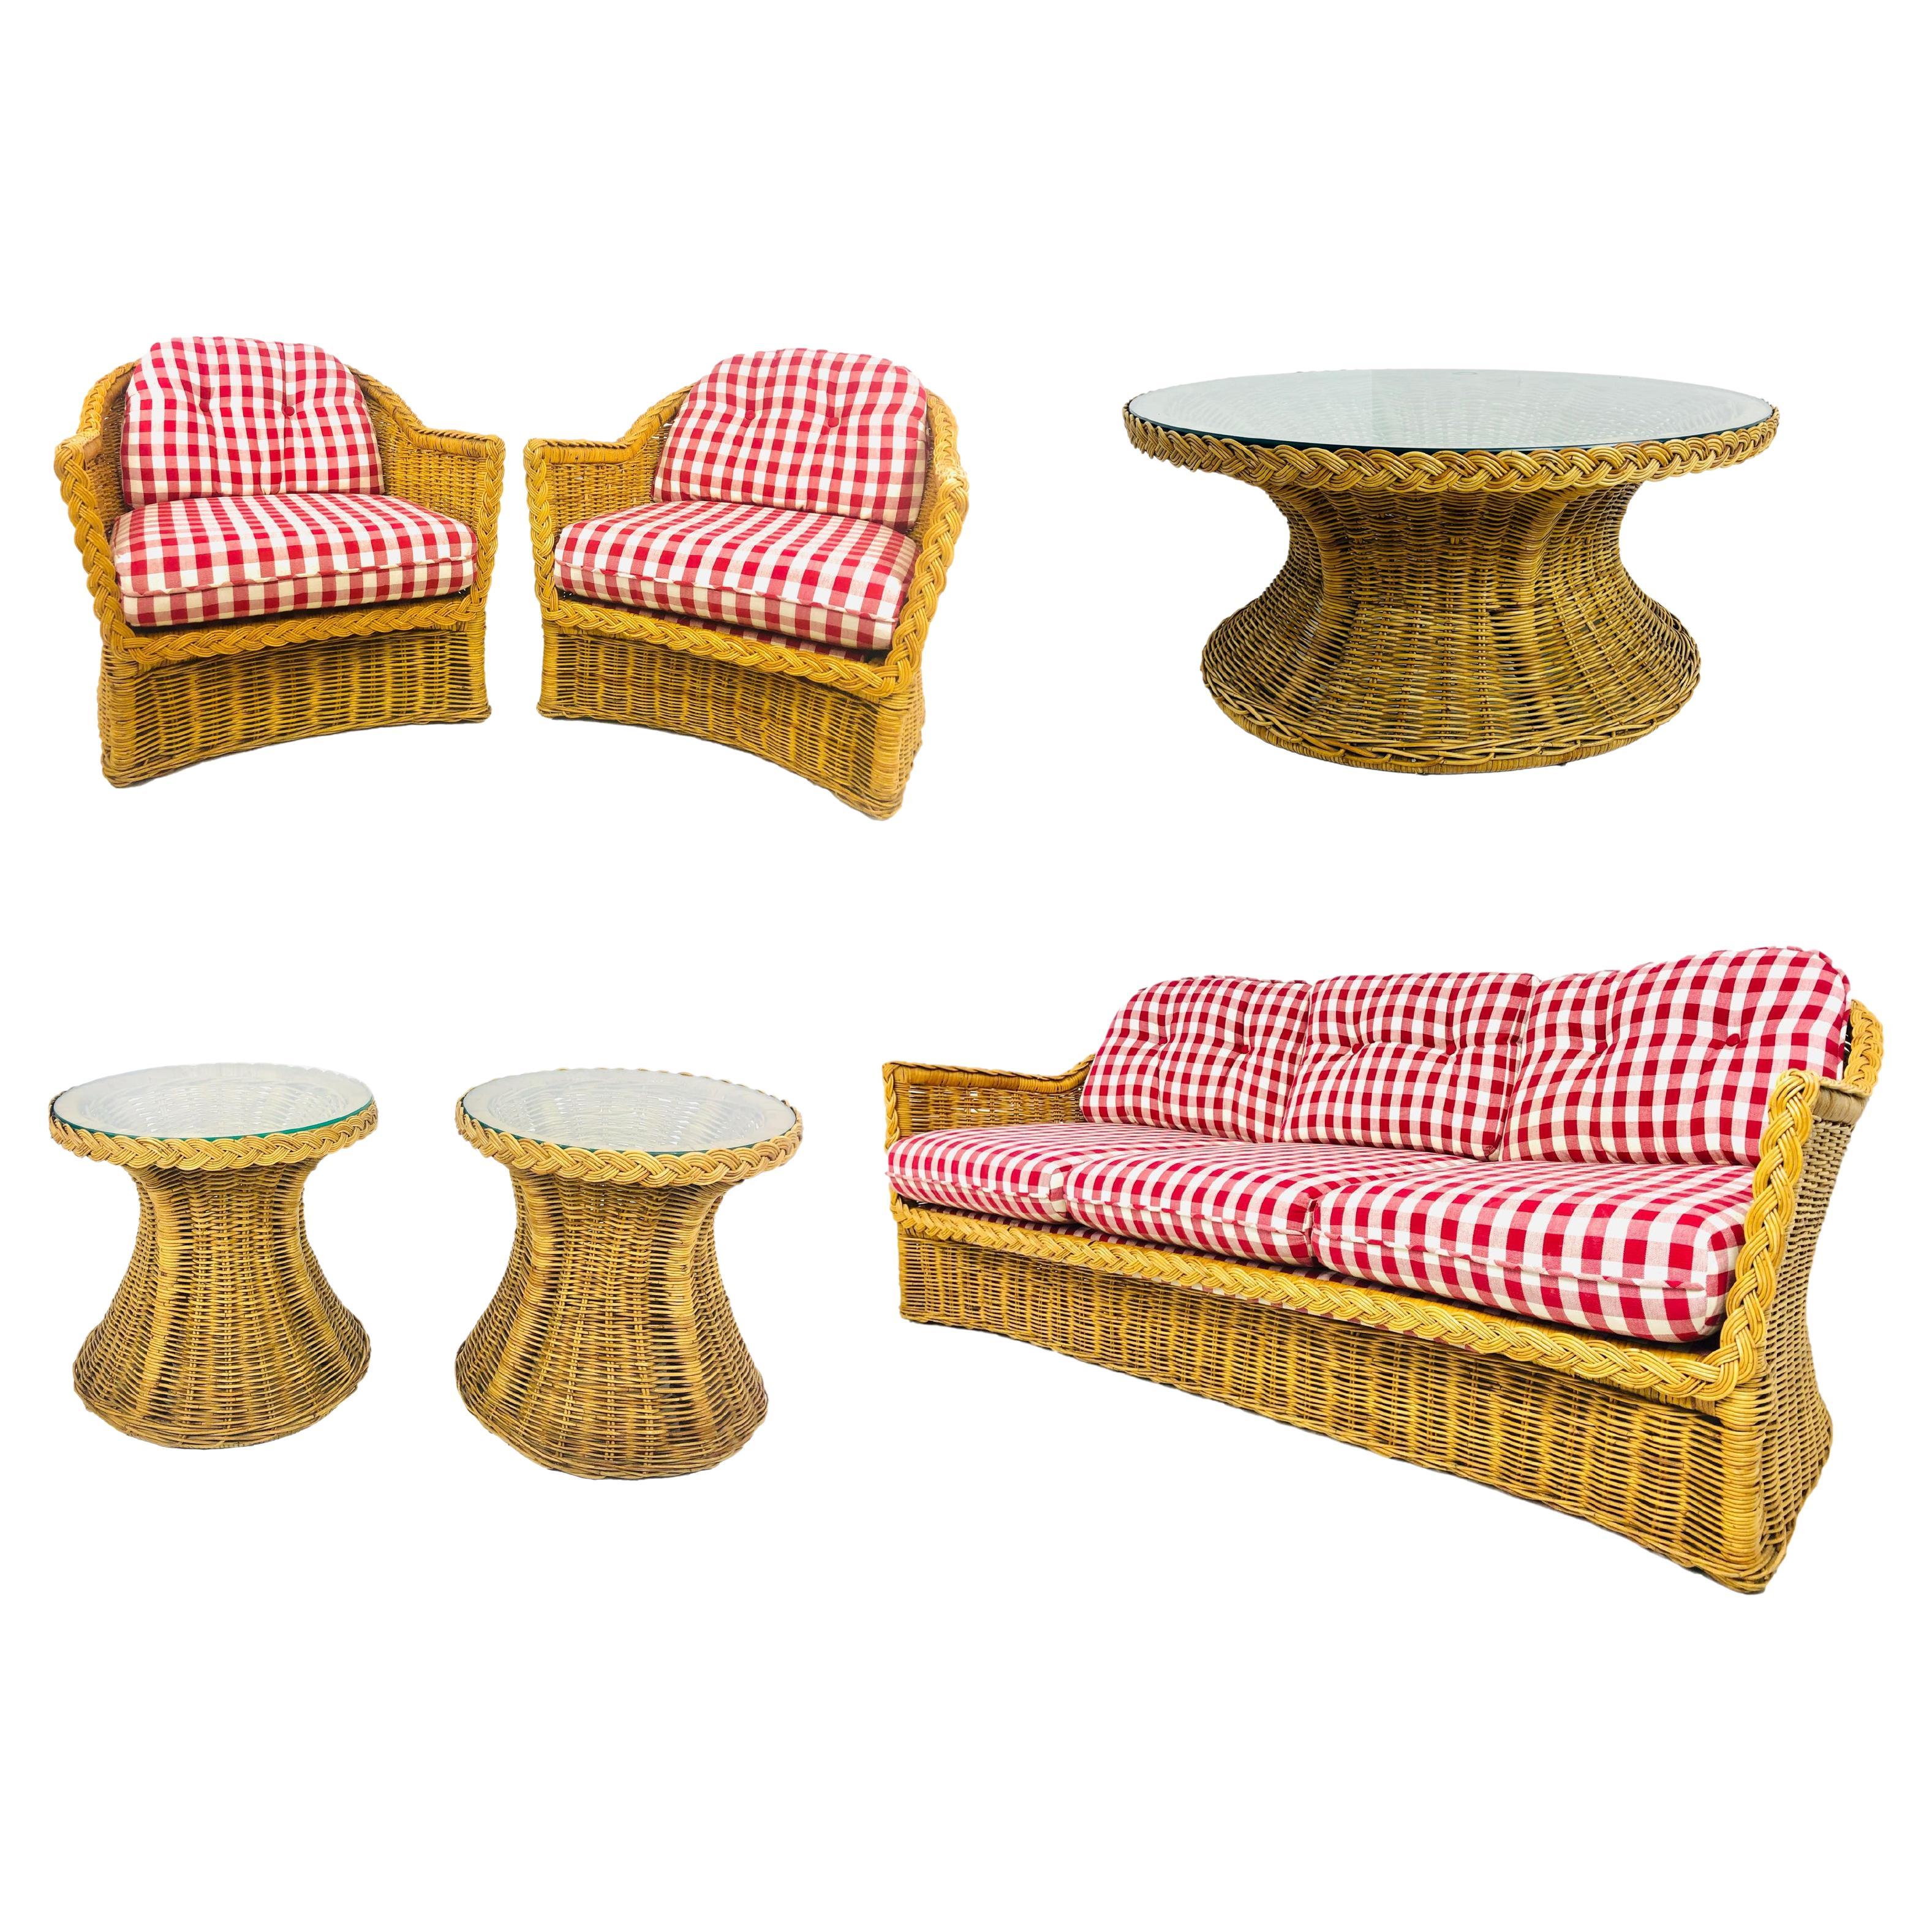 Braided Rattan Living Room Set by Wicker Works